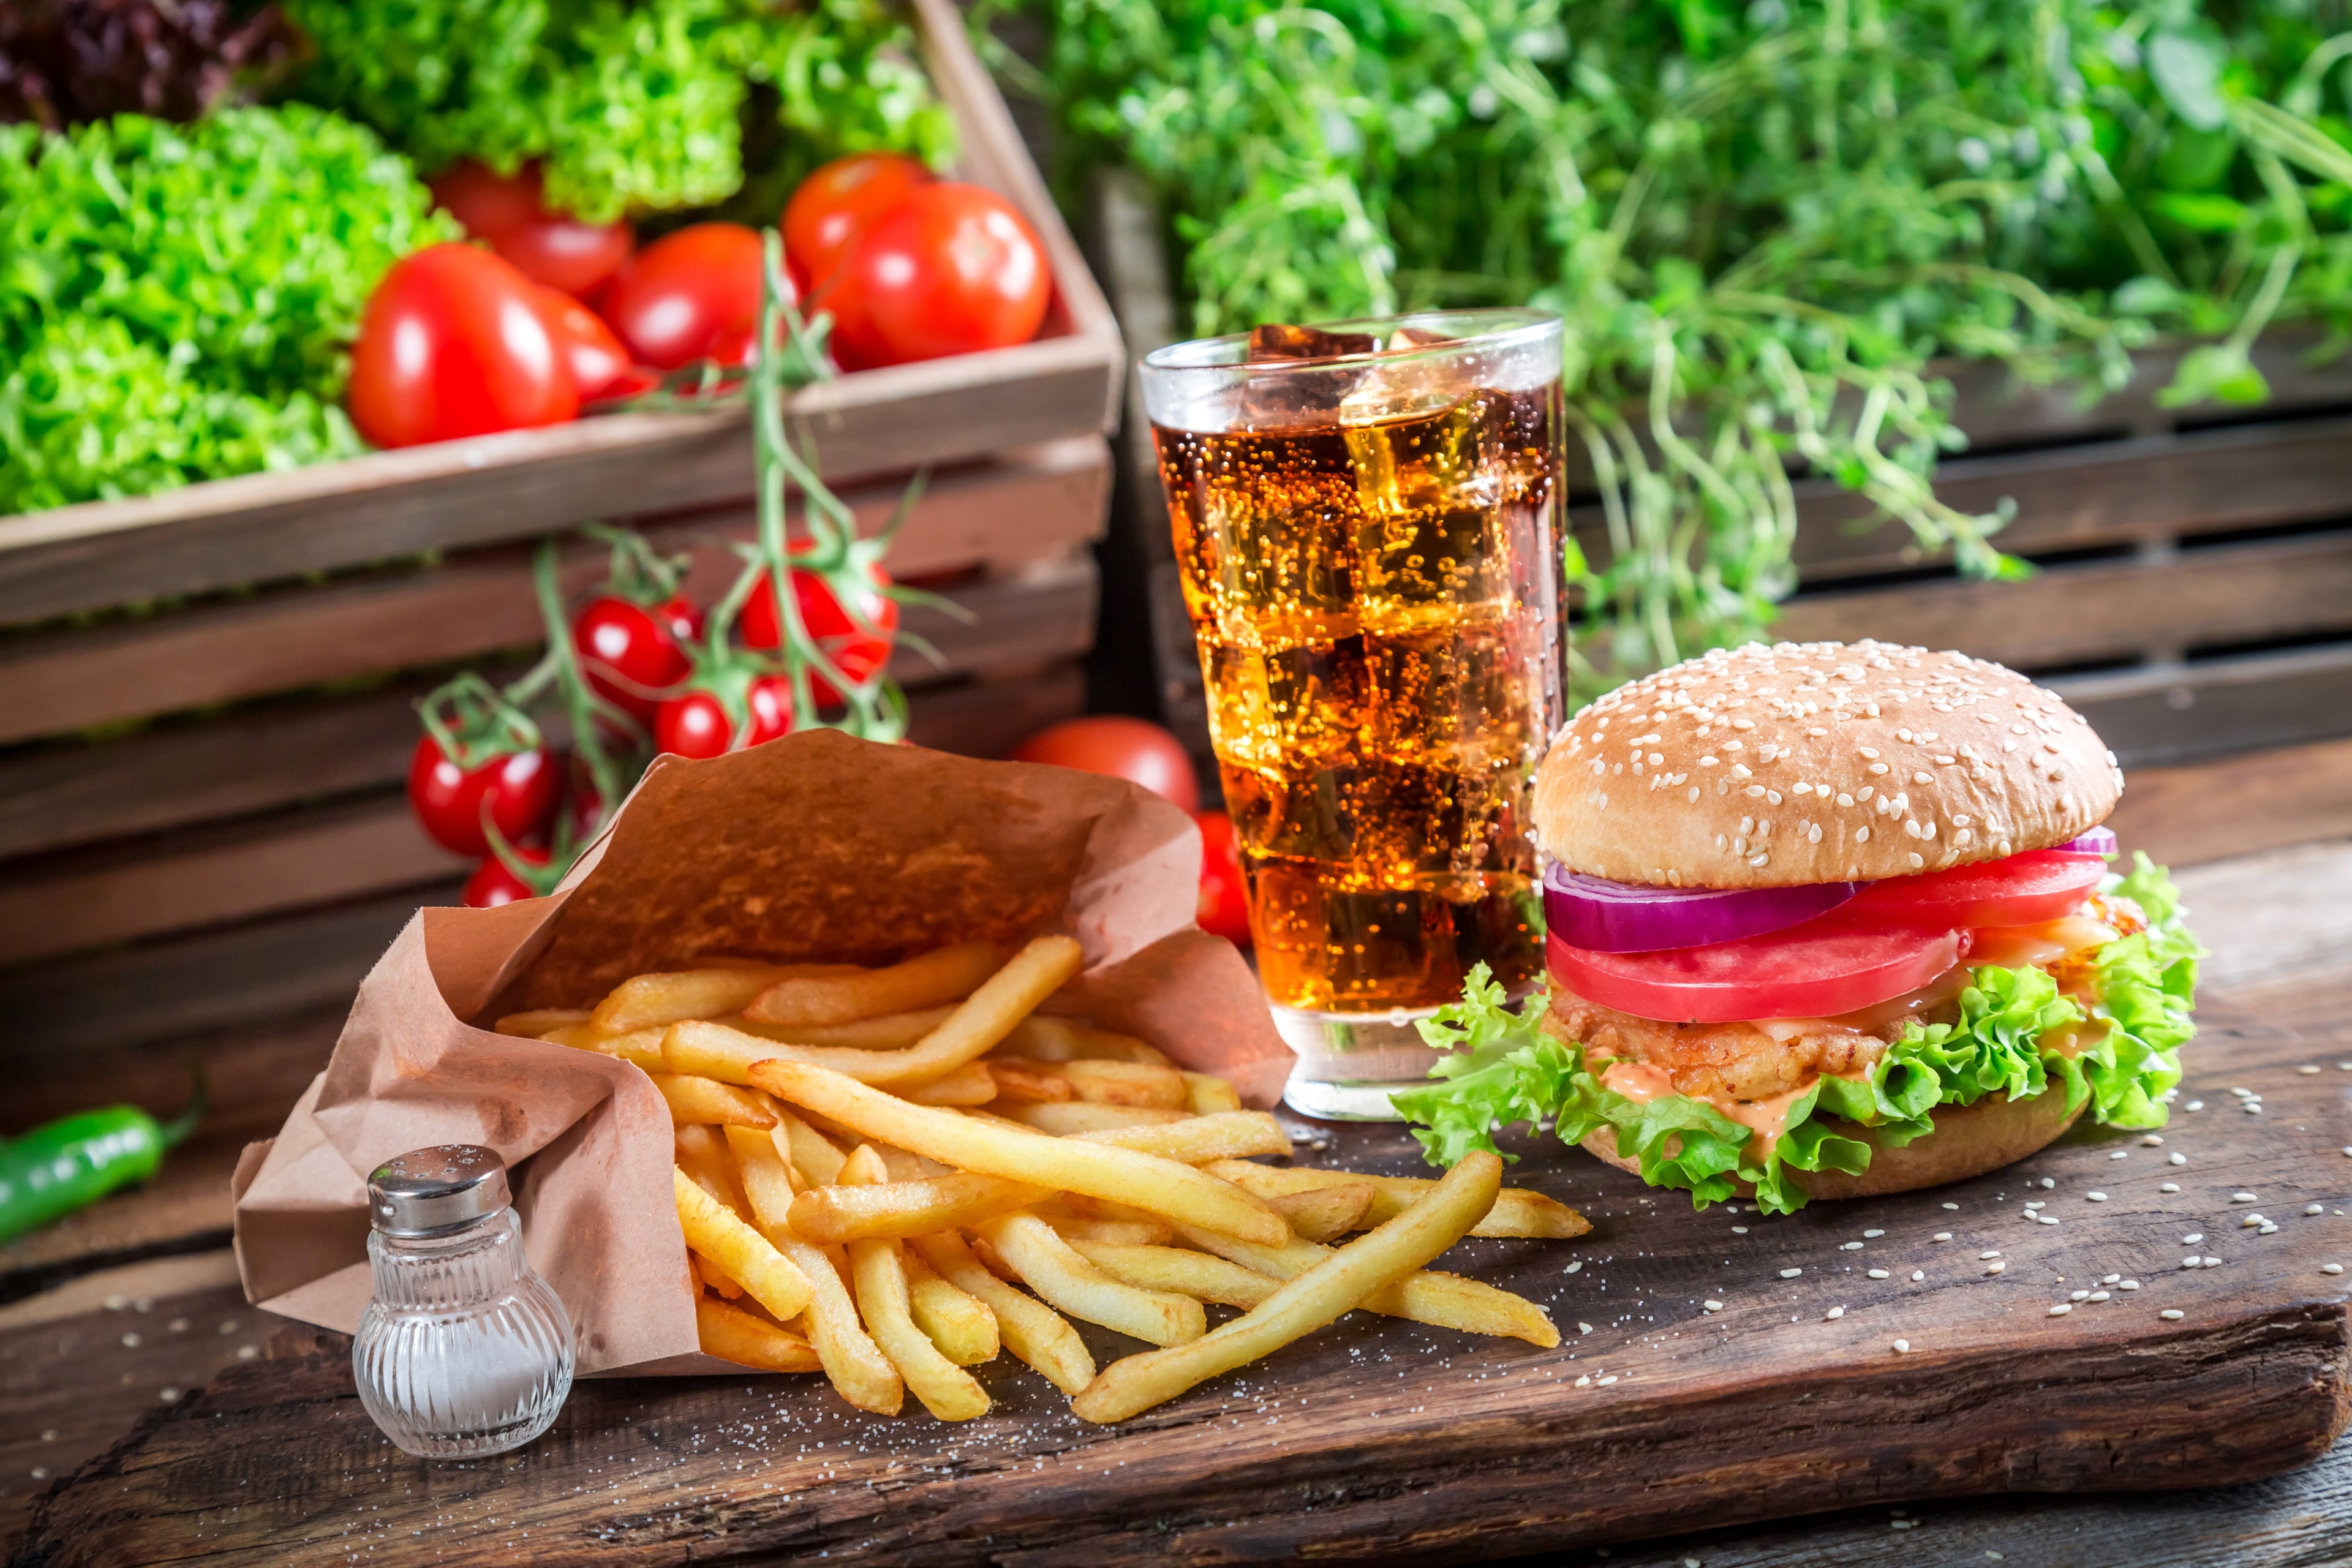 burger 4k picture download, food and drink, fast food, prepared potato